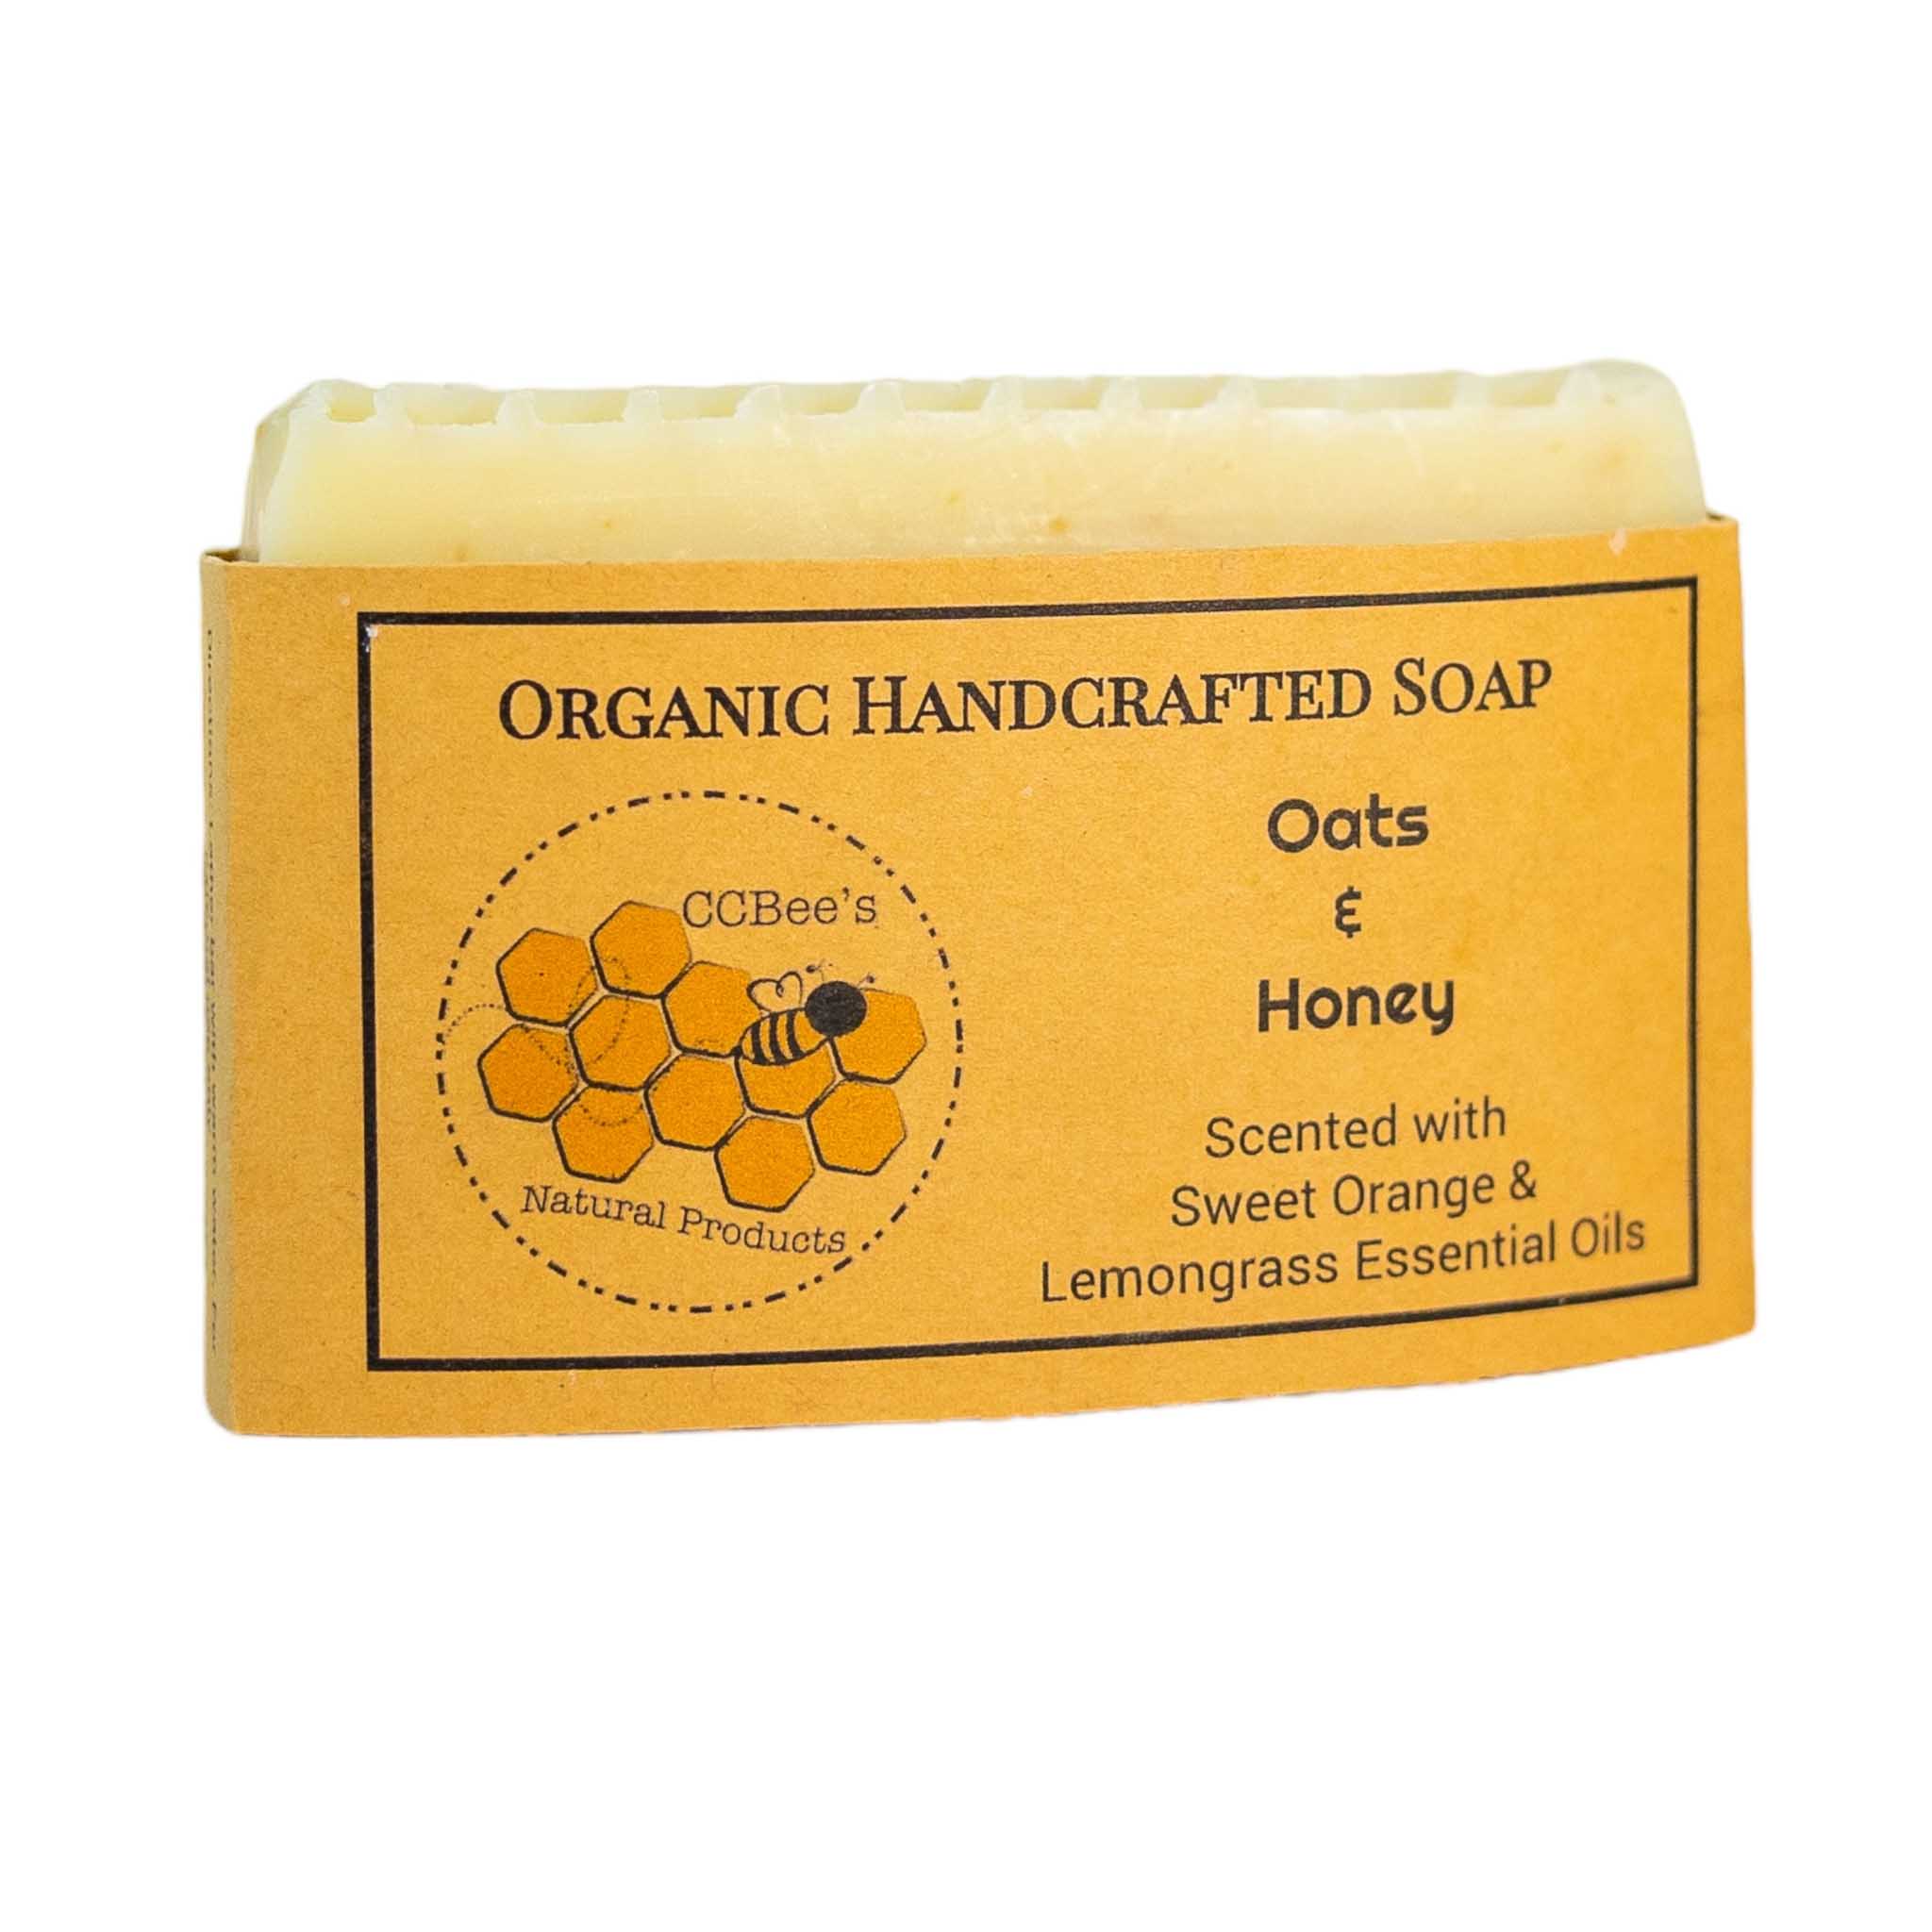 CCBees' Oat and Honey Soap